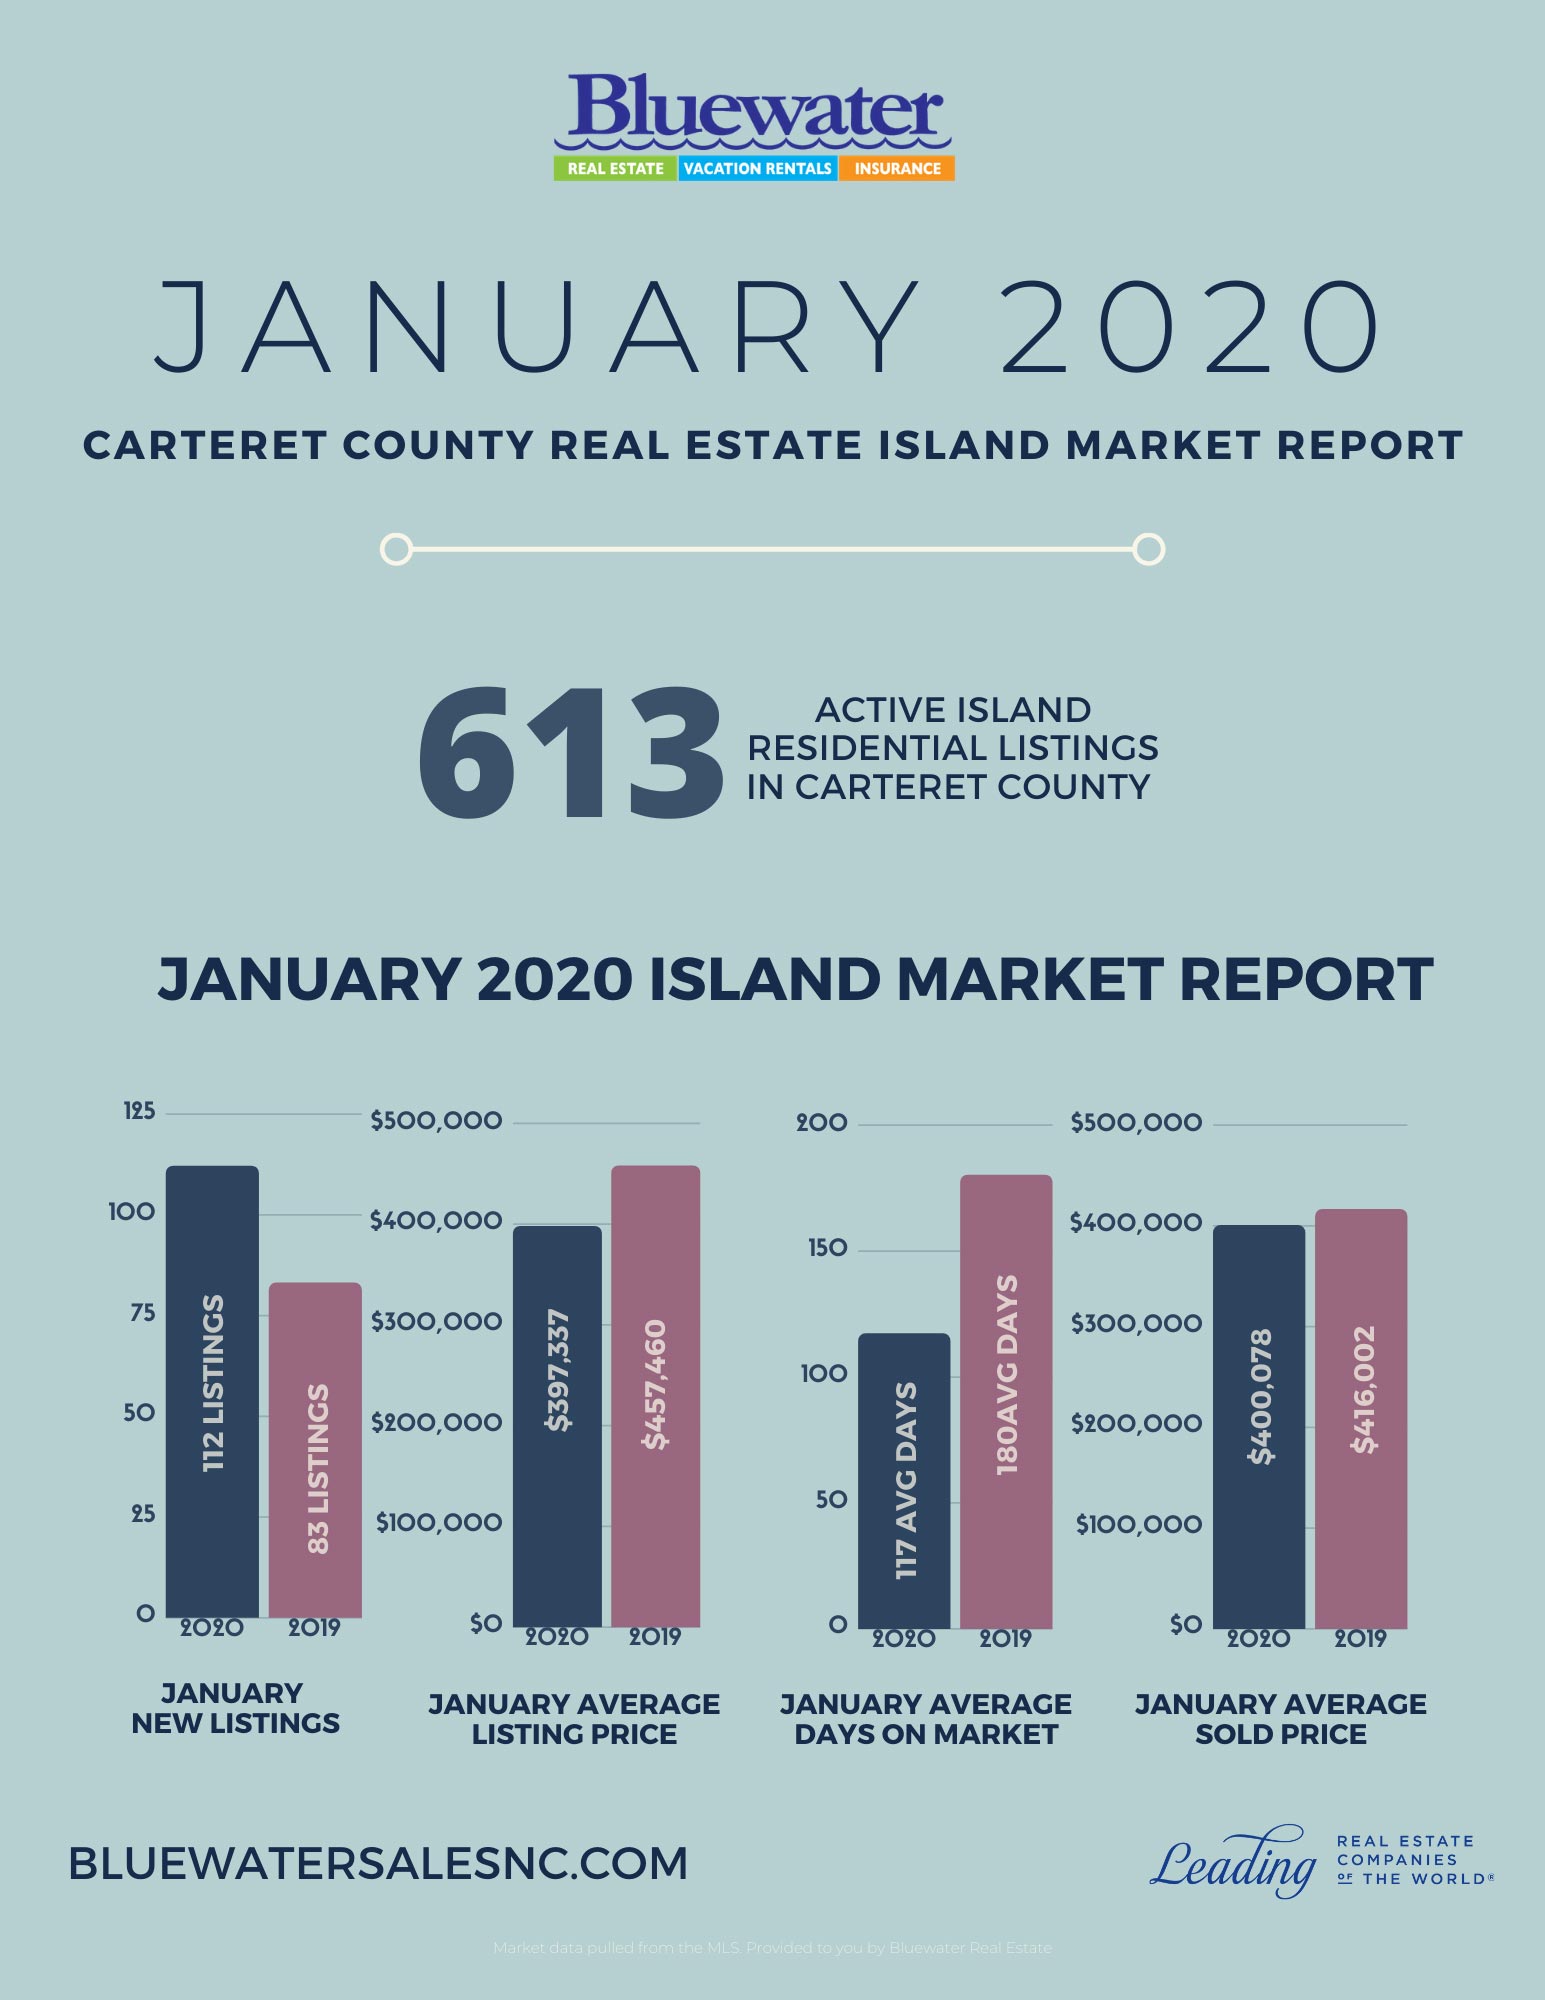 January 2020 Island Market Update- Prepared by Bluewater Real Estate